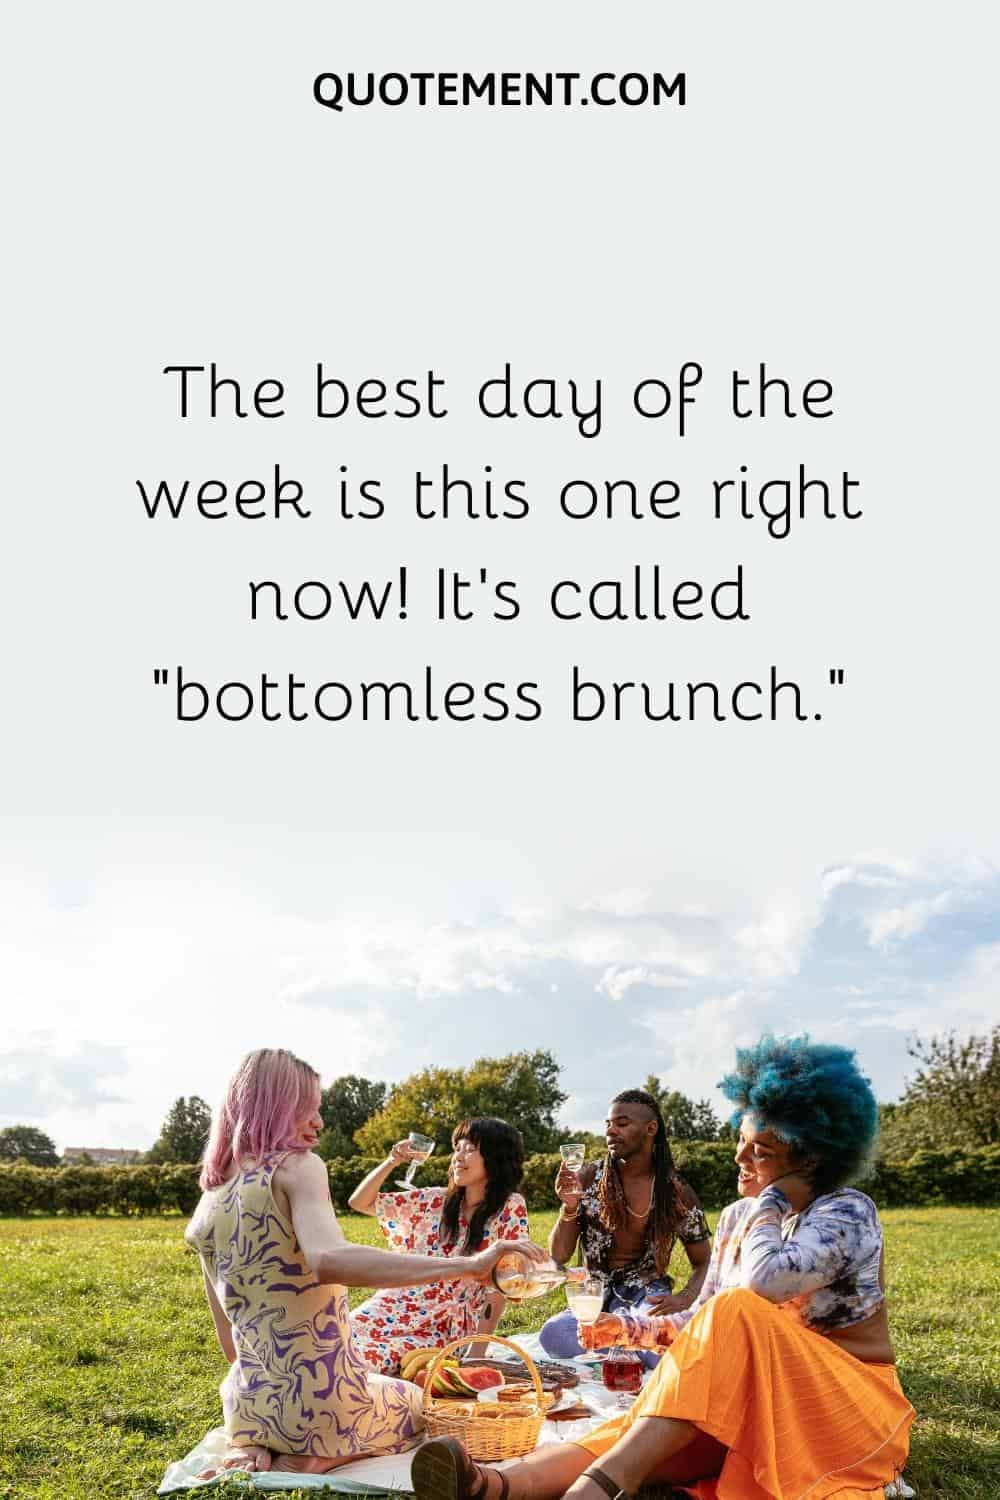 The best day of the week is this one right now! It’s called “bottomless brunch.”